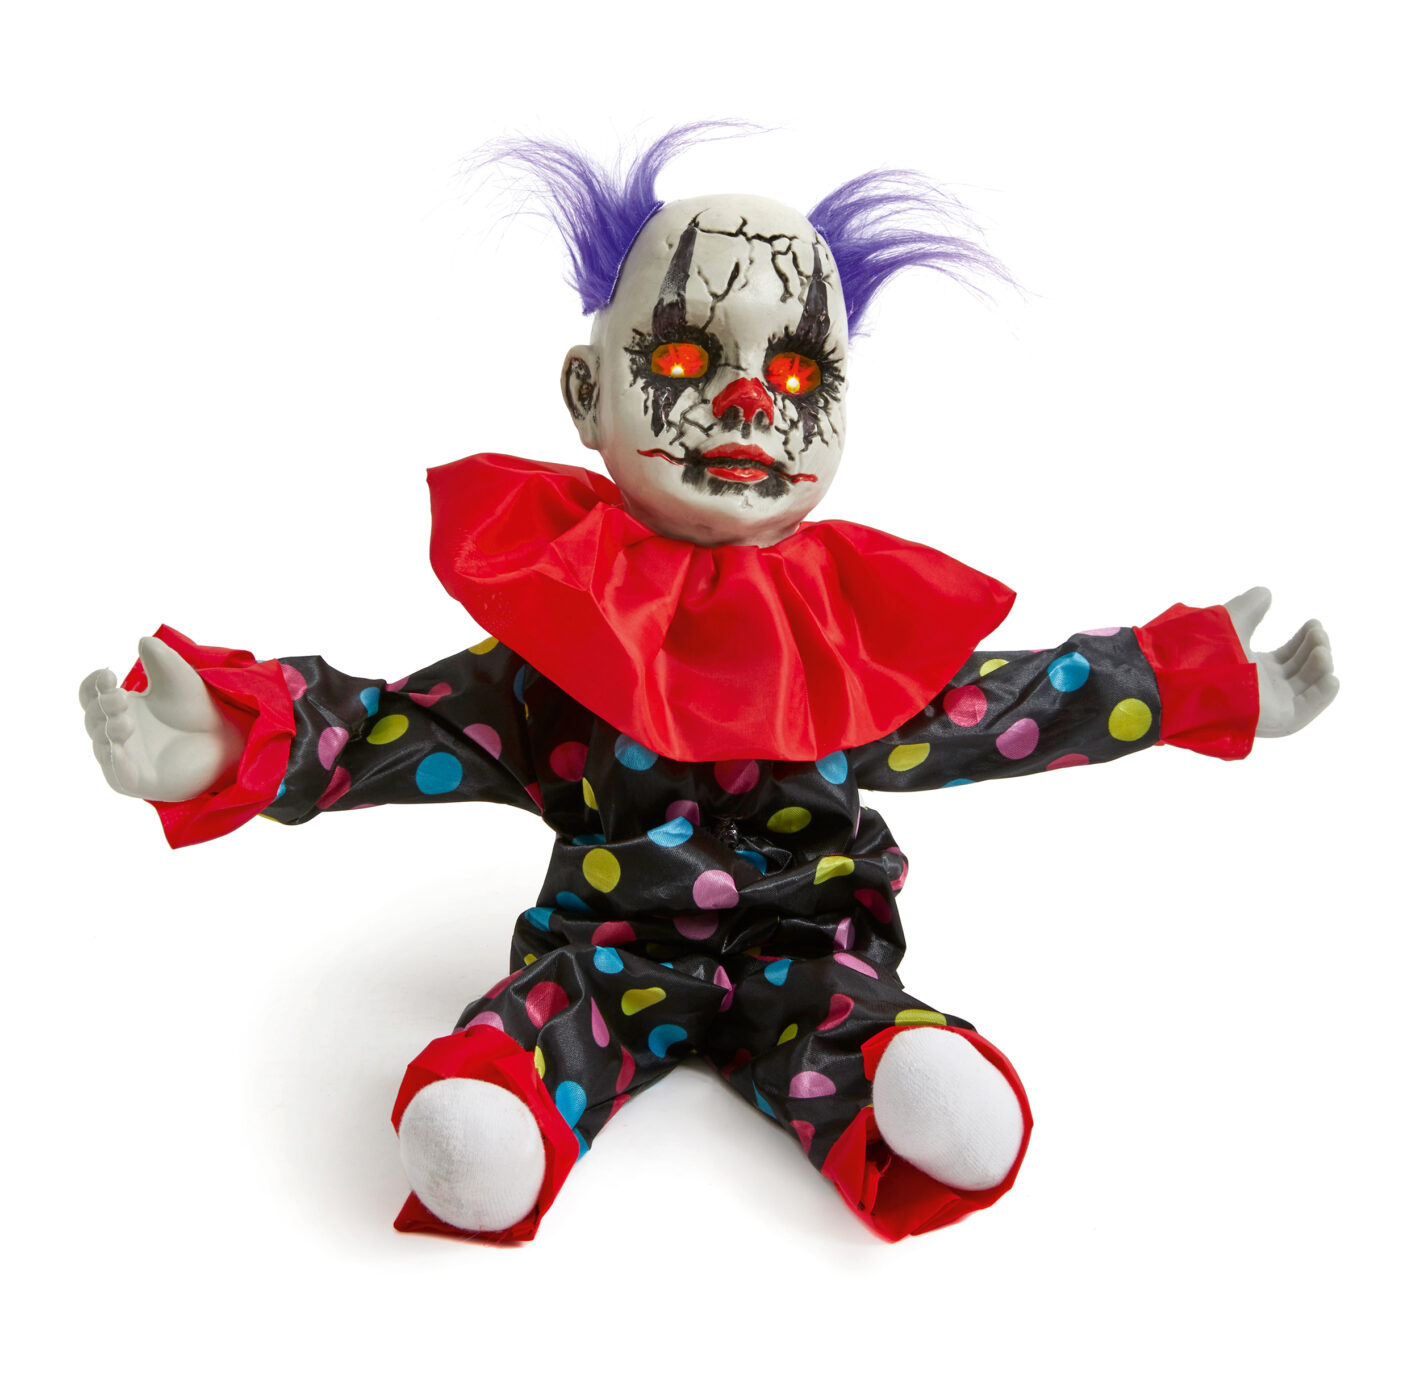 a photo of a scare clown doll